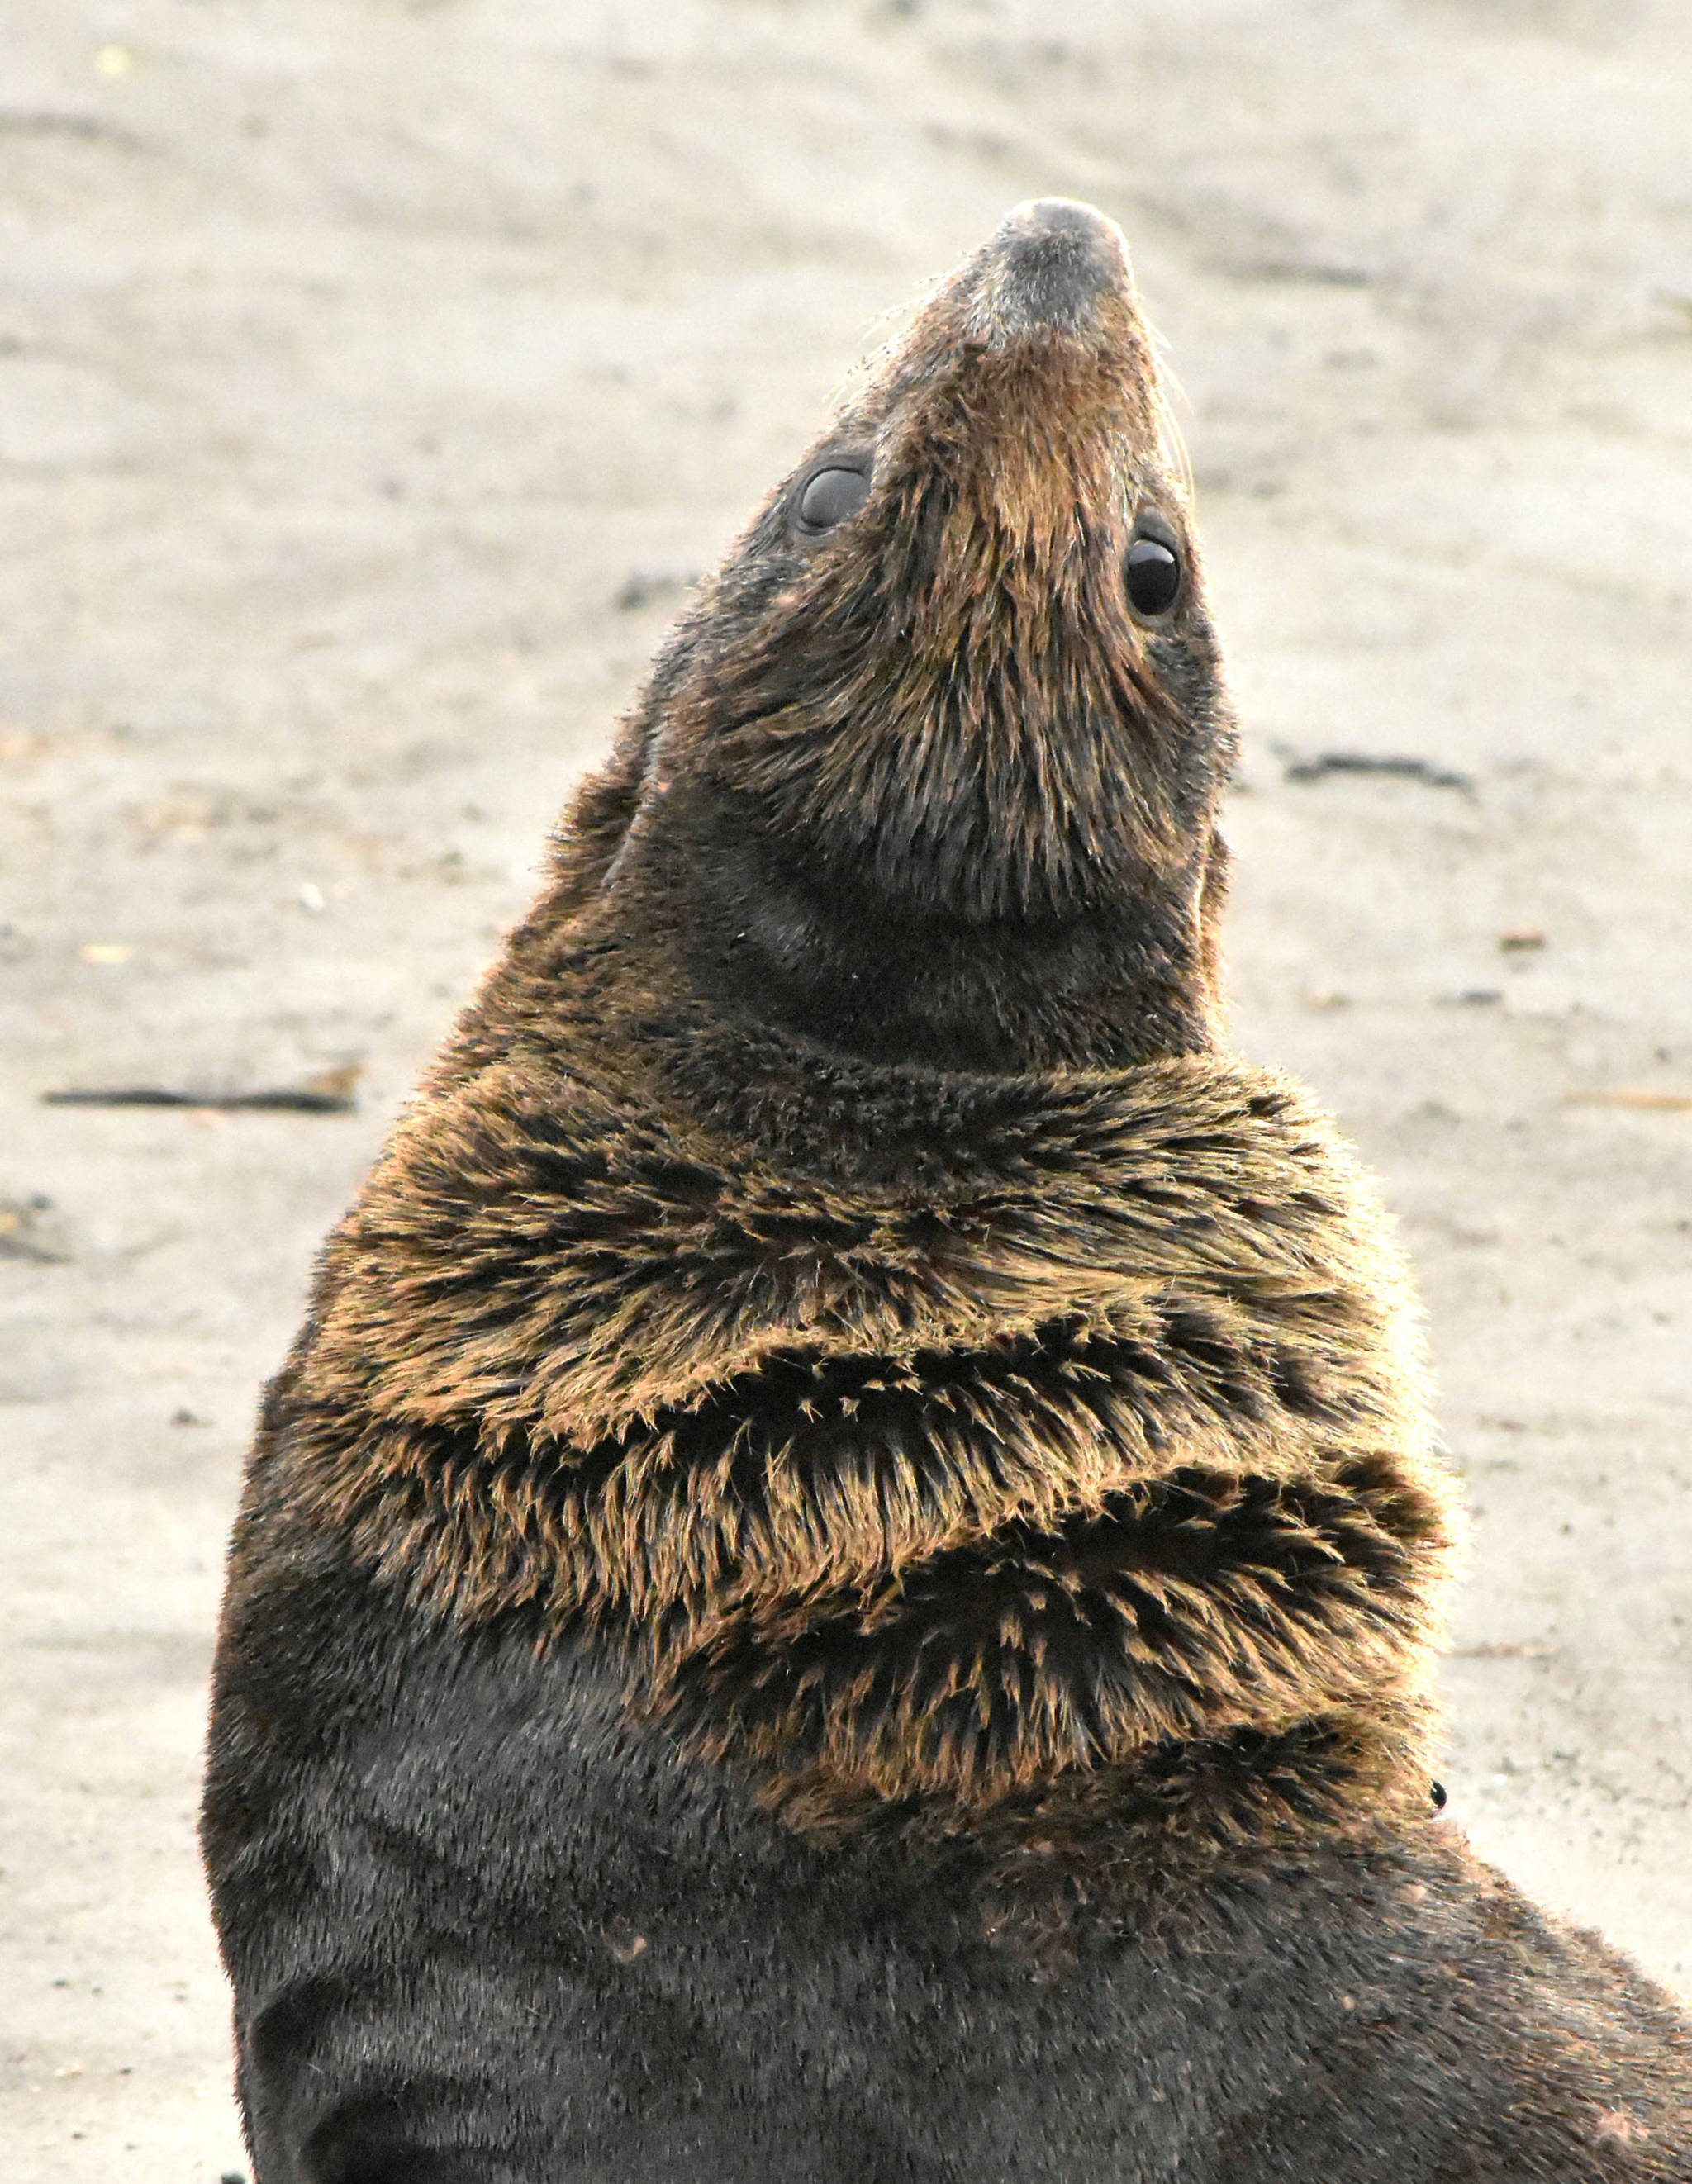 A male northern fur seal shows impressive neck flexibility on St Paul Island. (Photo by Linda R. Shaw) A male northern fur seal shows impressive neck flexibility on St Paul Island. (Photo by Linda R. Shaw)